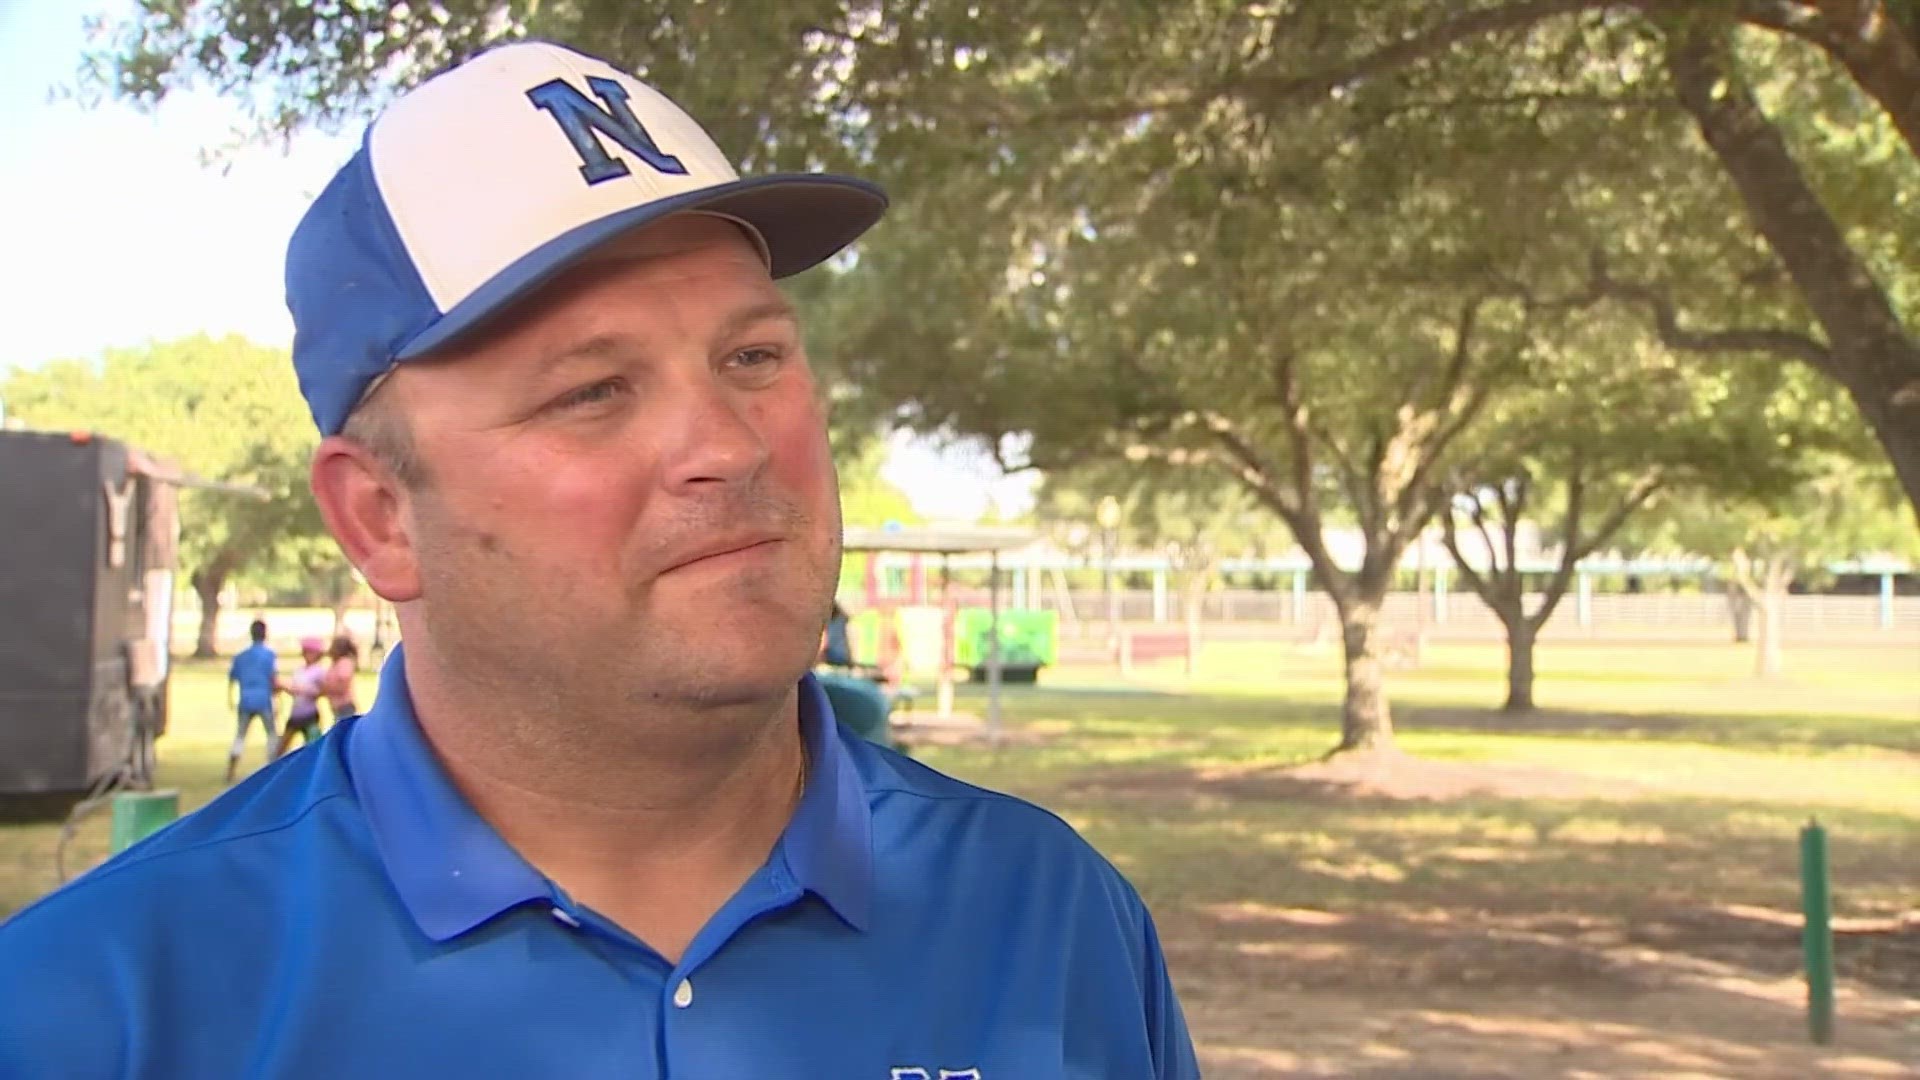 Two years after the team was sent home due to a positive COVID test, the Needville Little League team is heading to the World Series.